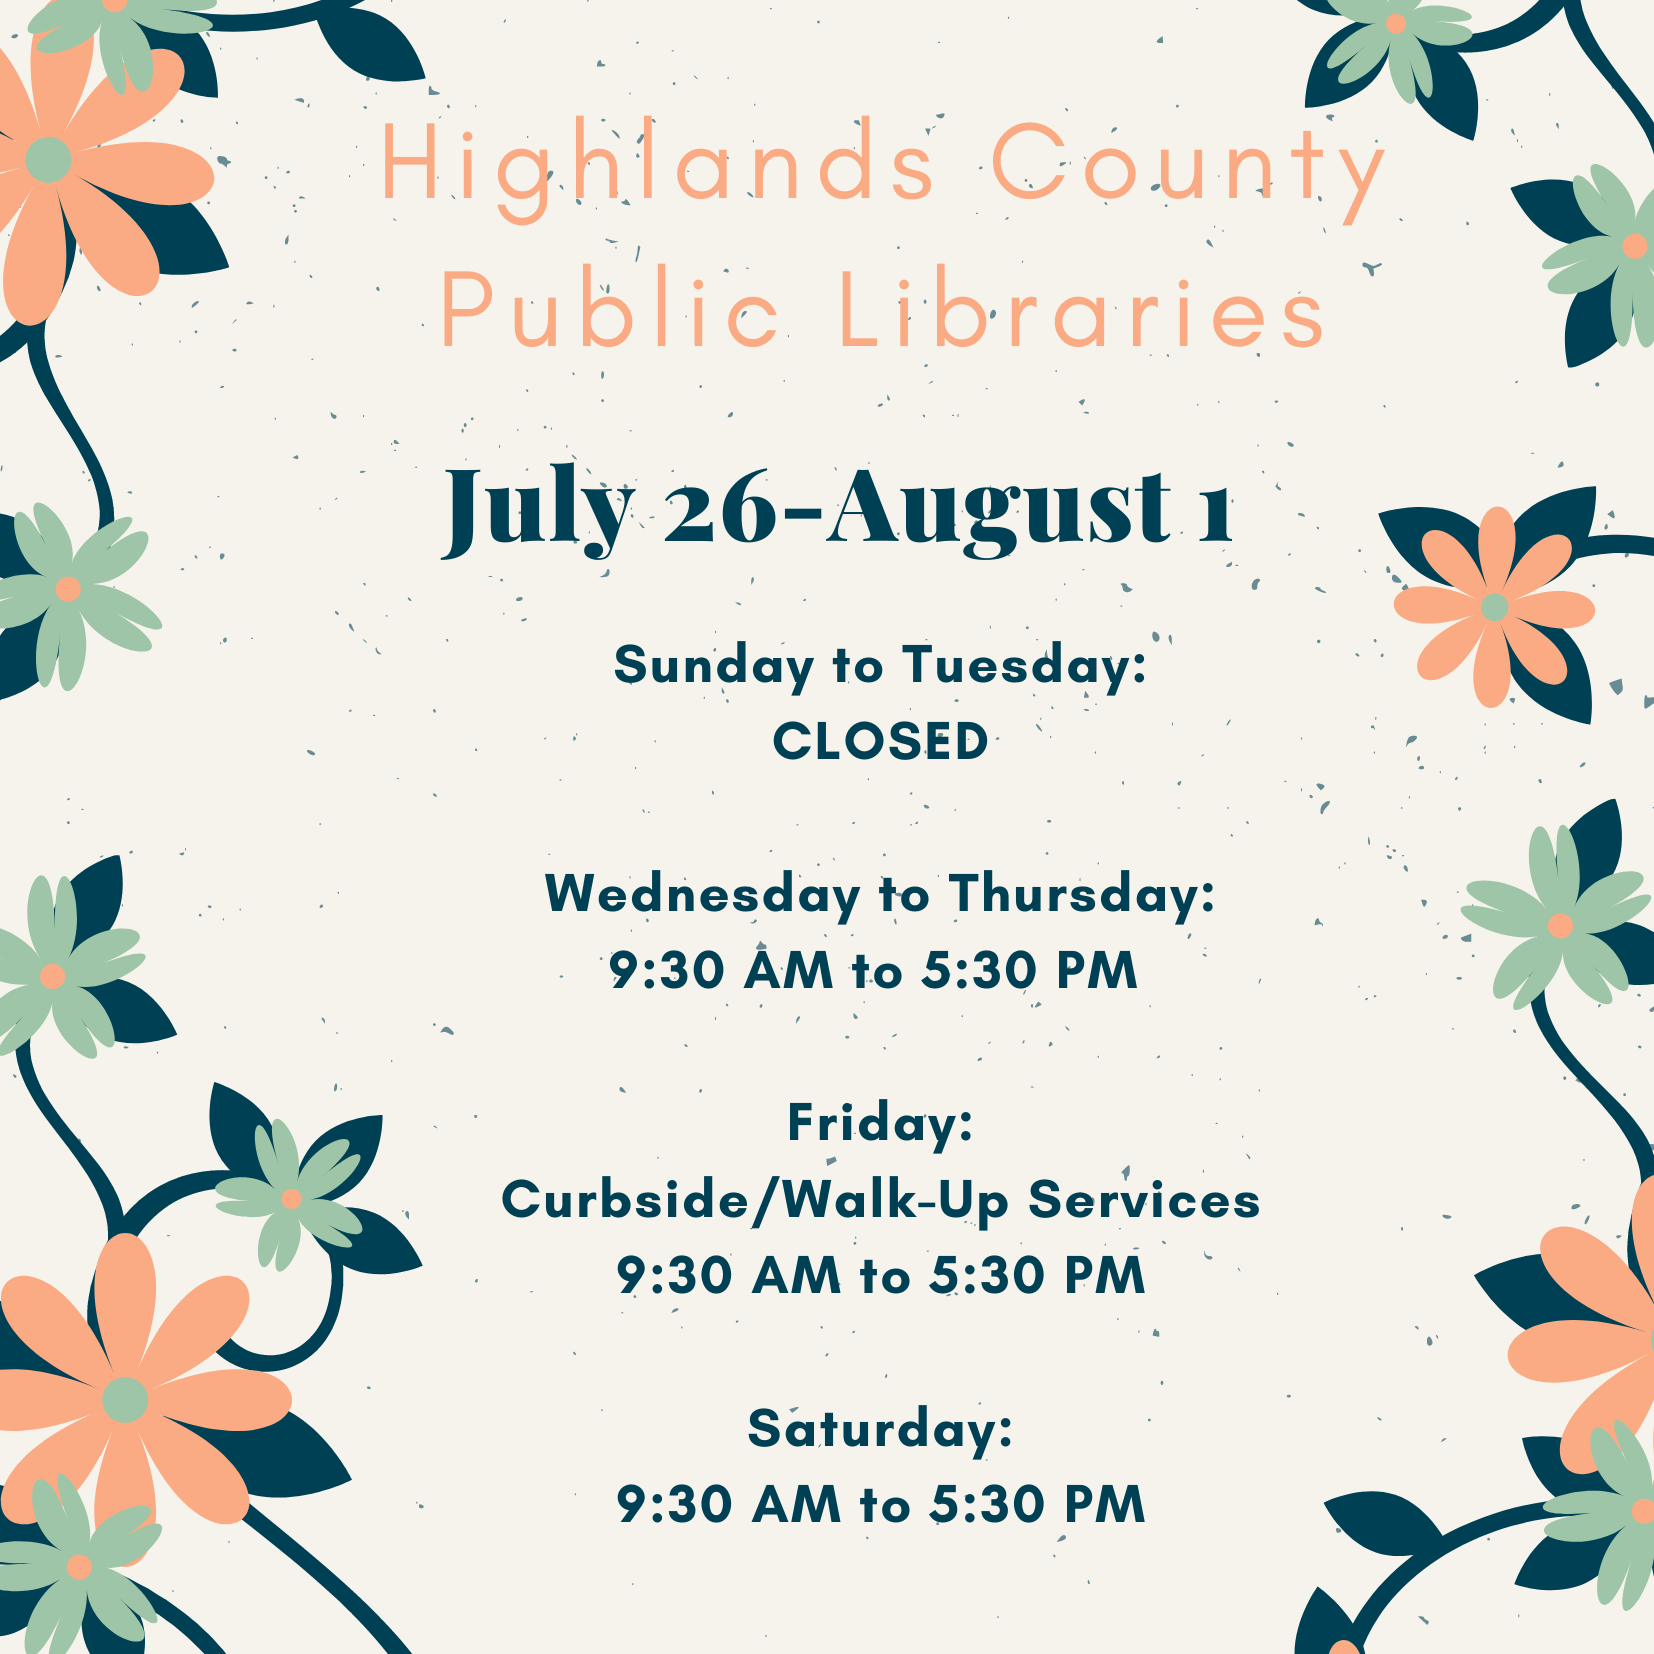 Highlands County Public Libraries Schedule: Sunday - Tuesday: Closed Wednesday & Thursday: Open all areas, 9:30 AM to 5:30 PM Friday: Building access - closed, Curbside & Walk Up Services 9:30 AM to 5:30 PM Saturday: Open all areas, 9:30 AM to 5:30 PM